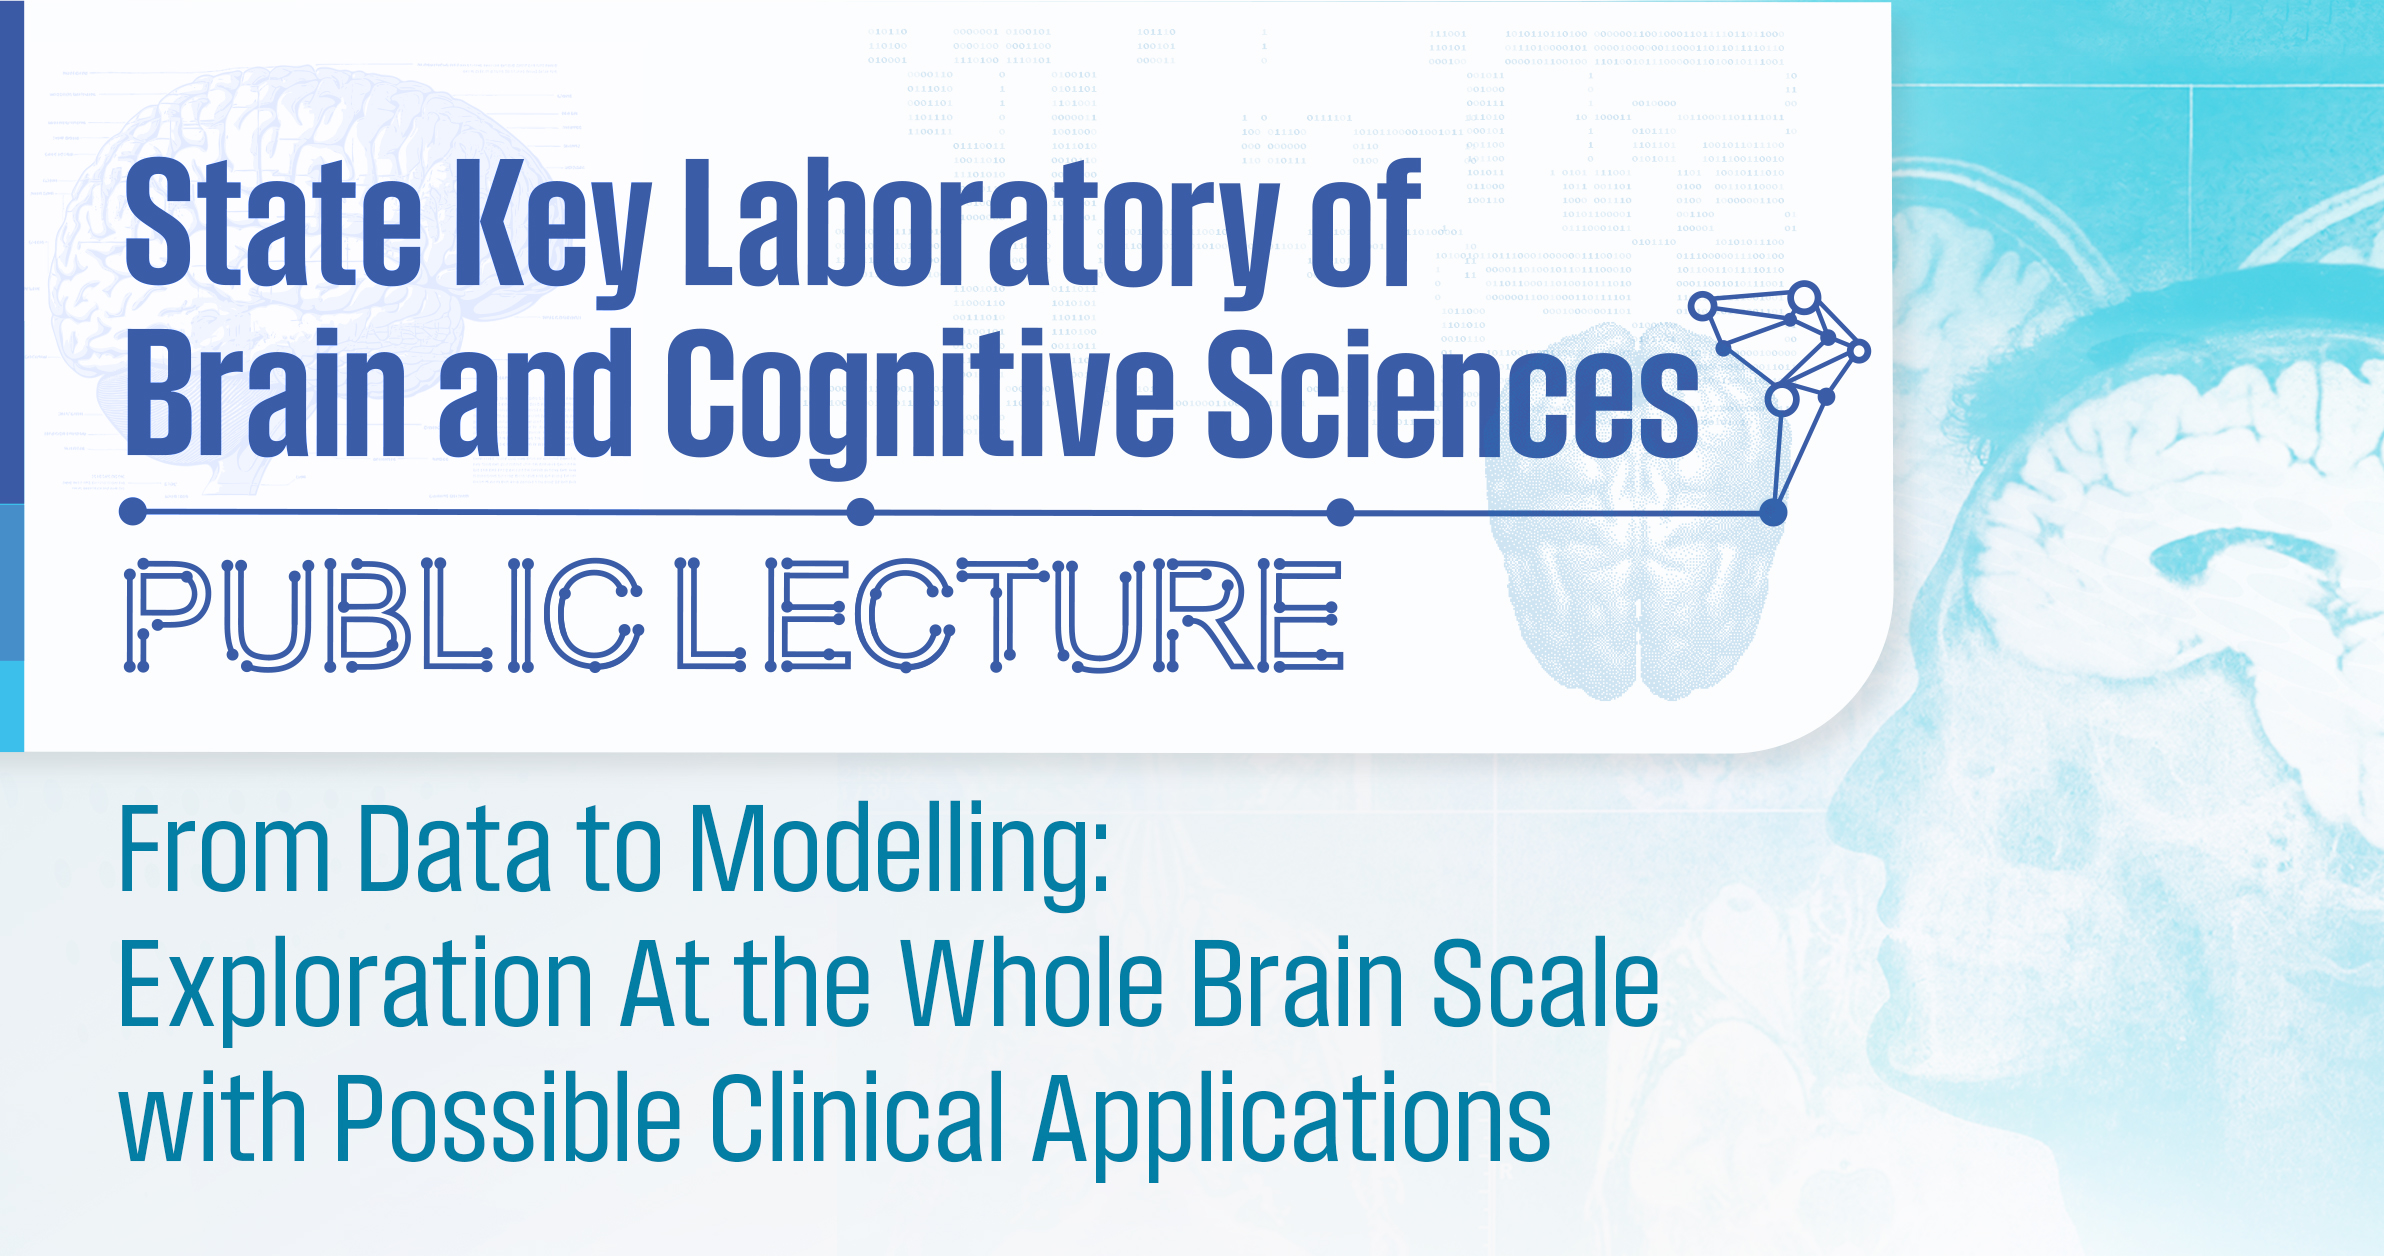 From Data to Modelling:Exploration At the Whole Brain Scale with Possible Clinical Applications